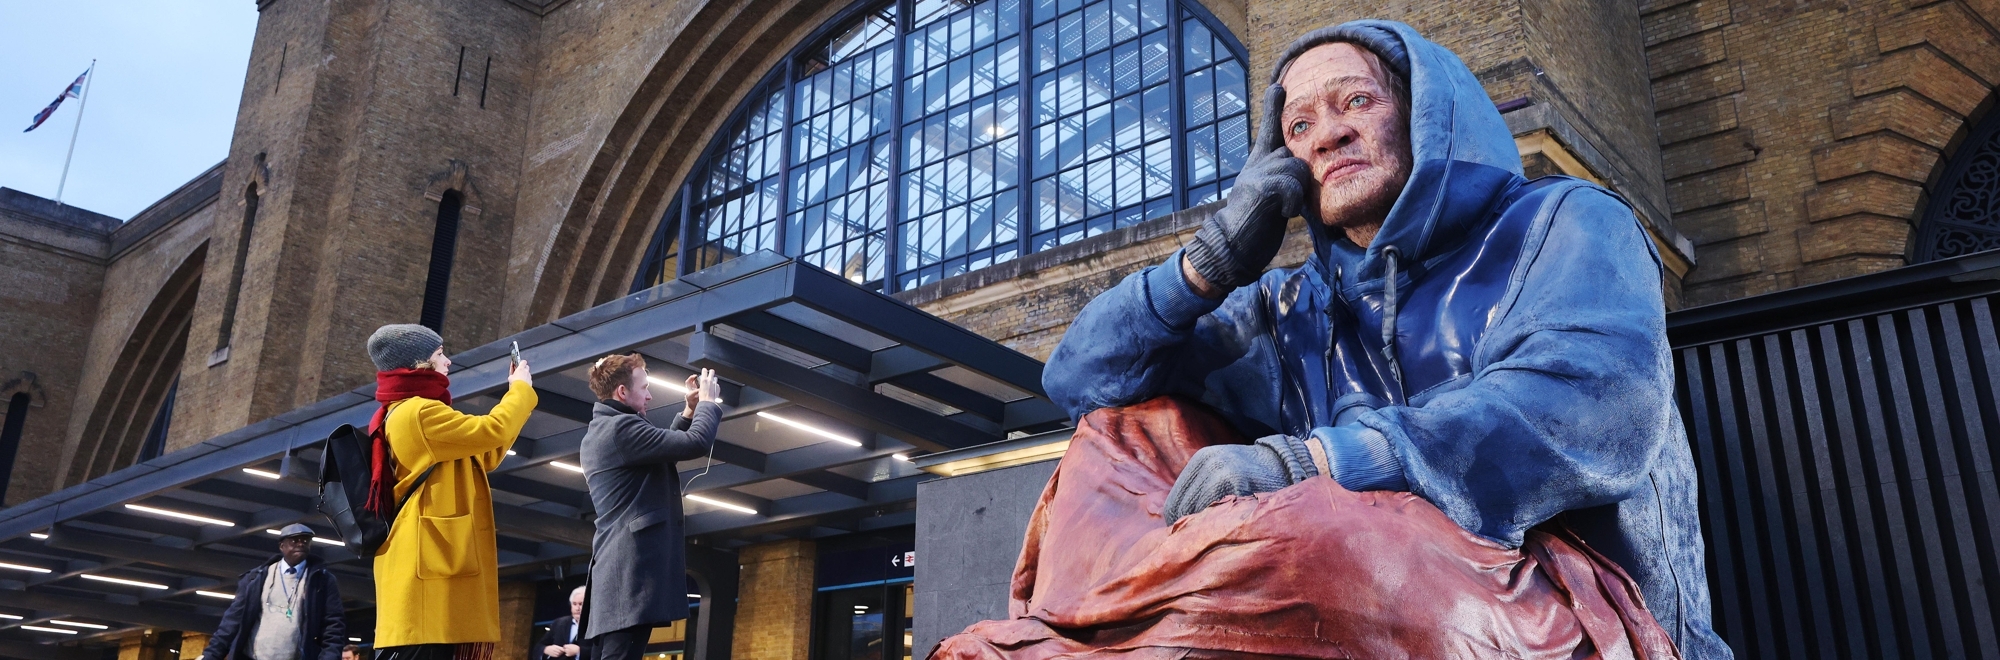 adam&eveDDB and Crisis make homelessness ‘Impossible to Ignore’ this Christmas